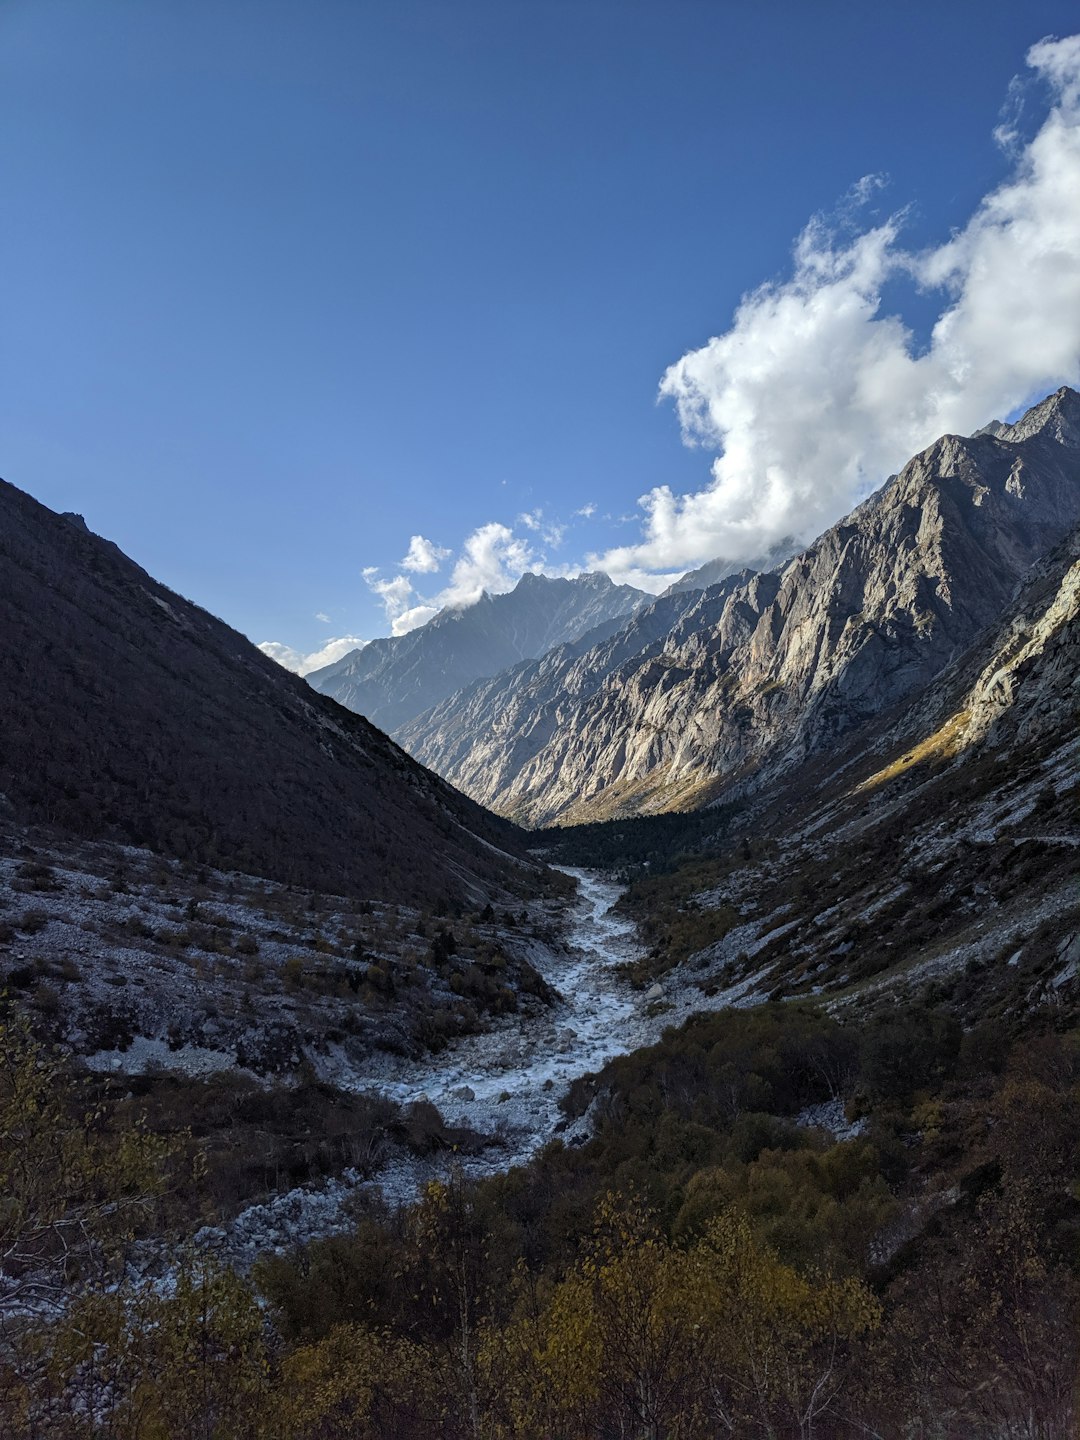 travelers stories about Highland in Gangotri, India